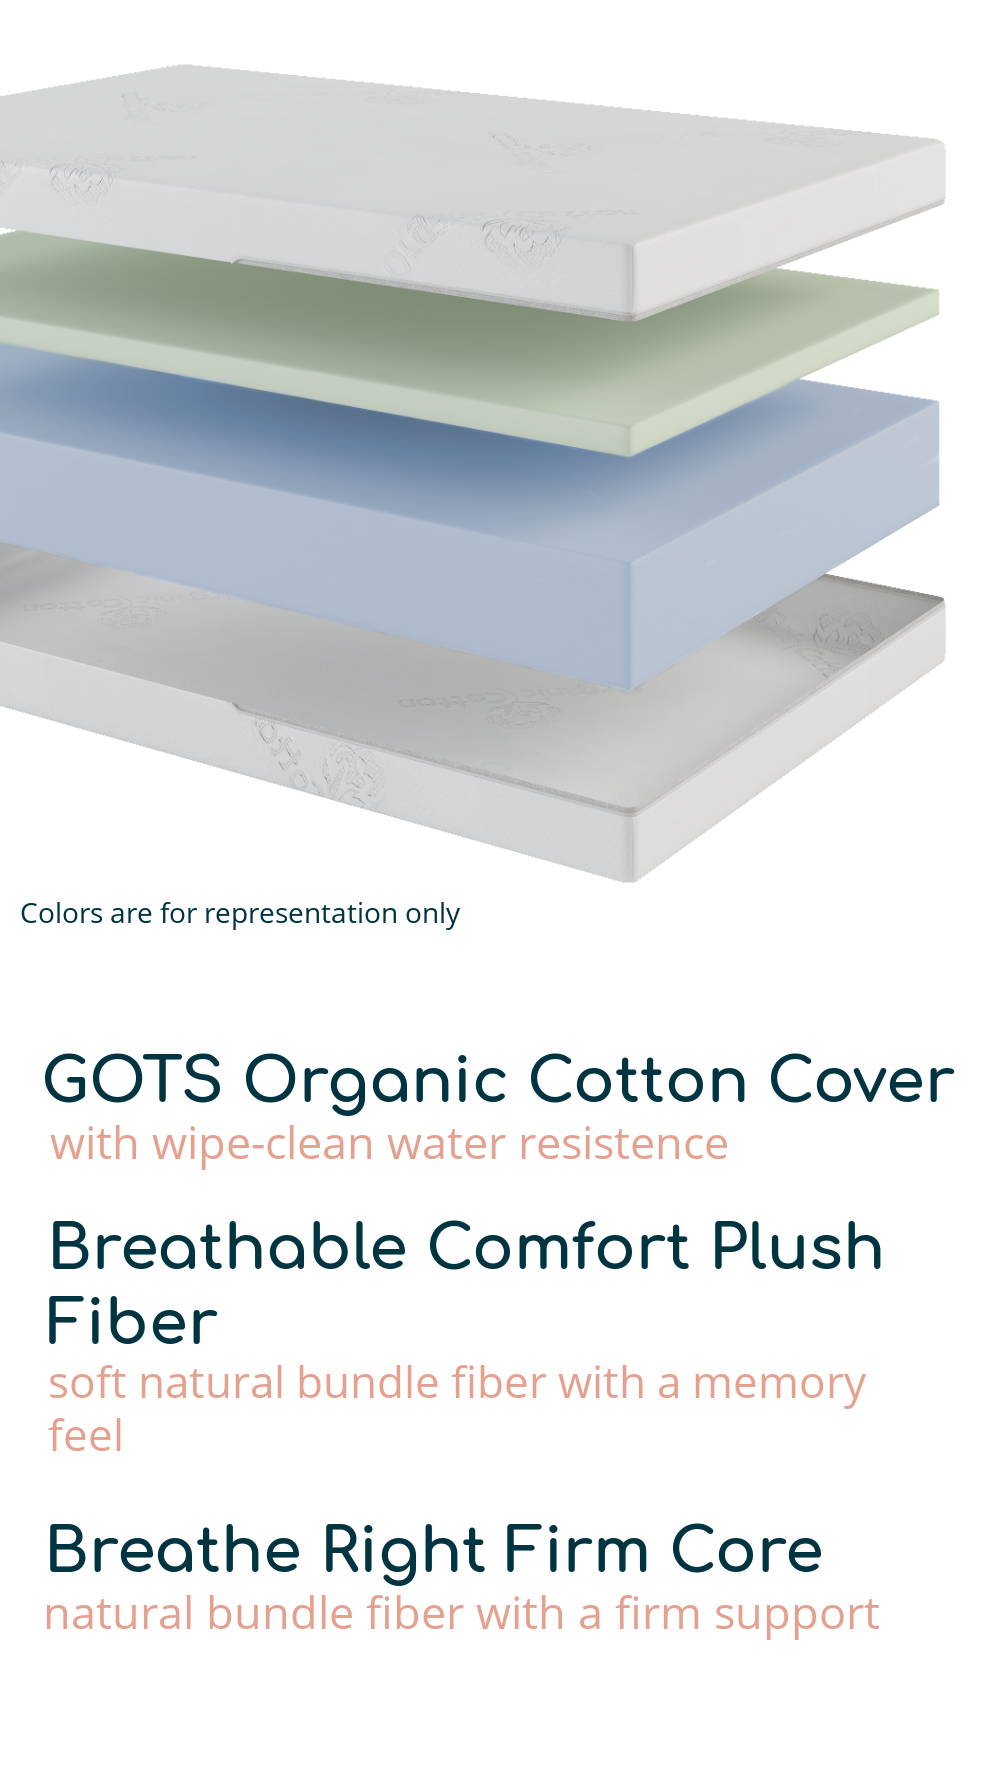 GOTS Organic Cotton Cover-with wipe clean resistance, Breathable Comfort Plush Fiber-soft natural bundle fiber with a memory feel, Breathe Right Firm Core-natural bundle fiber with a firm support for infants.